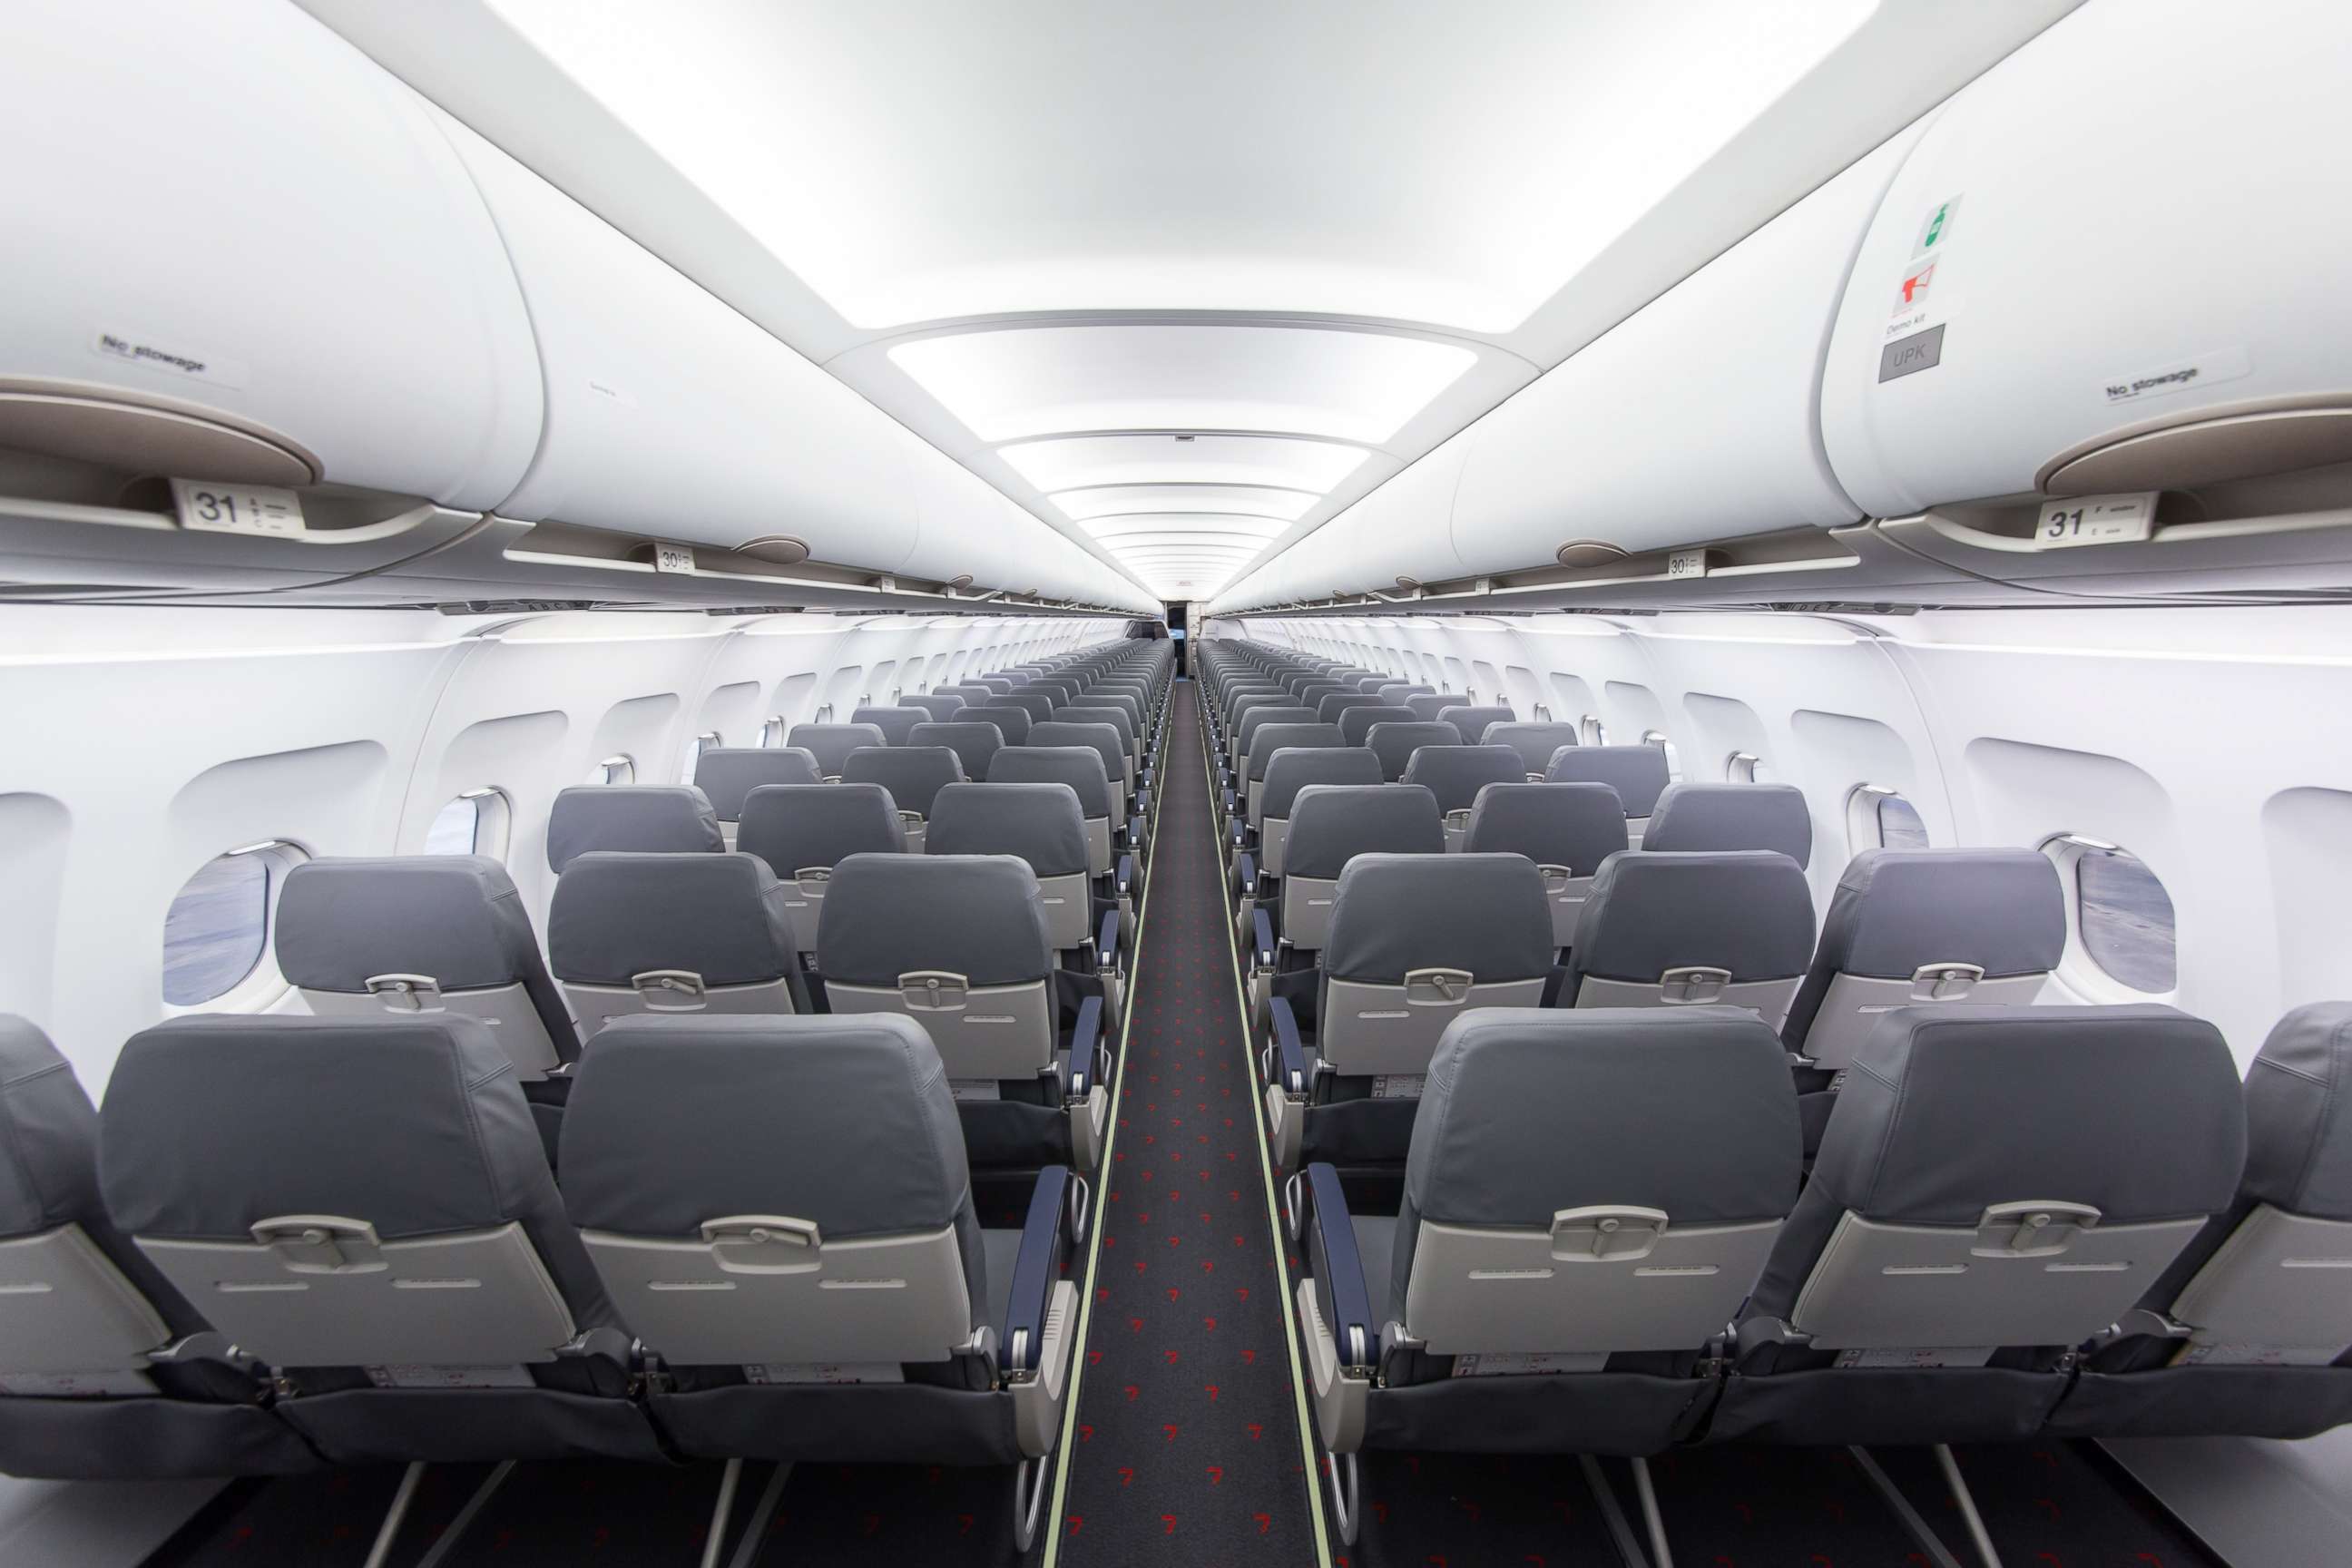 PHOTO: Rows of seats in the interior of commercial passenger airplane Airbus A320 are seen in an undated stock image.